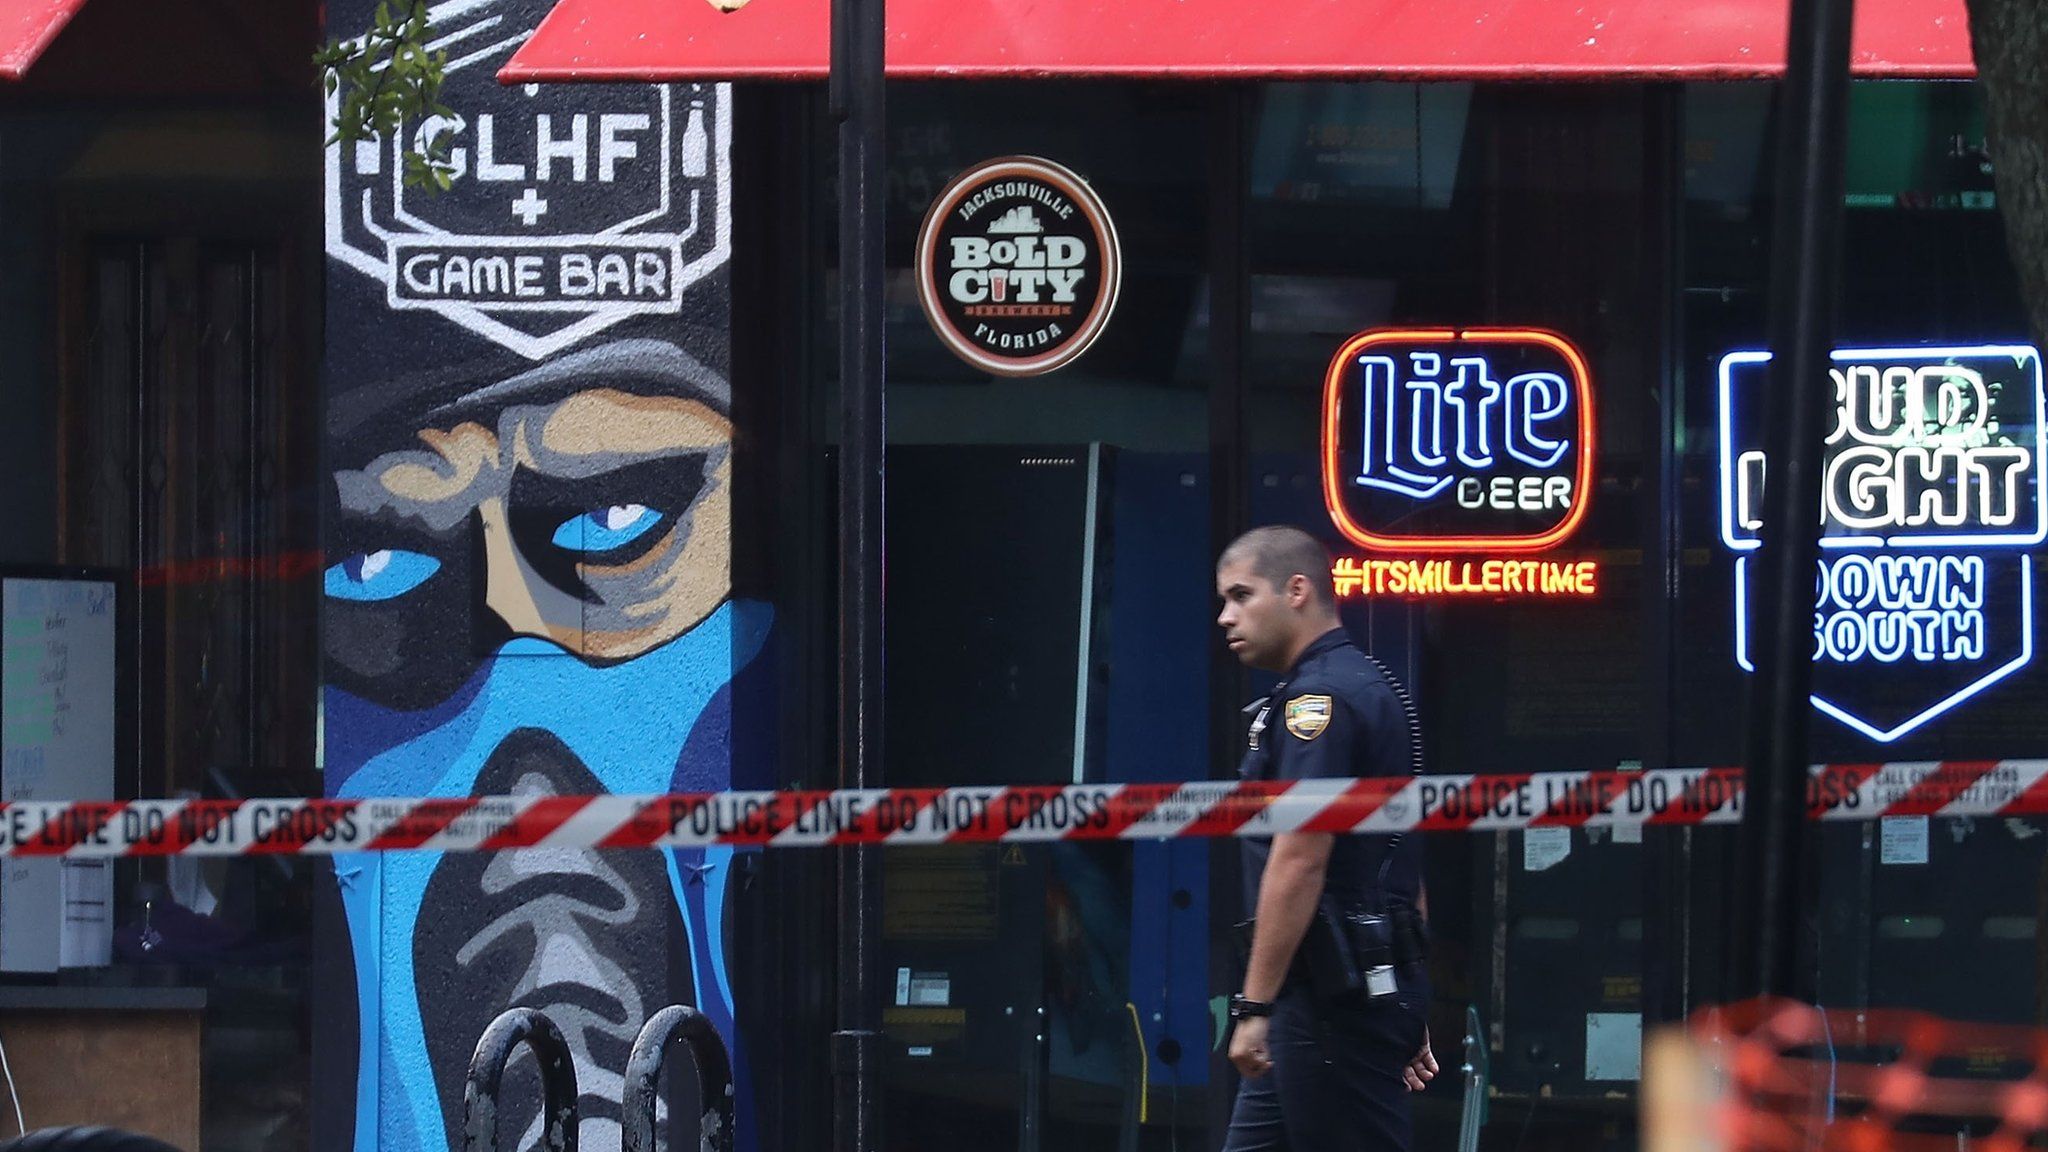 A Jacksonville Sheriff officer walks past the GLHF Game Bar on Monday morning, 27 August 2018